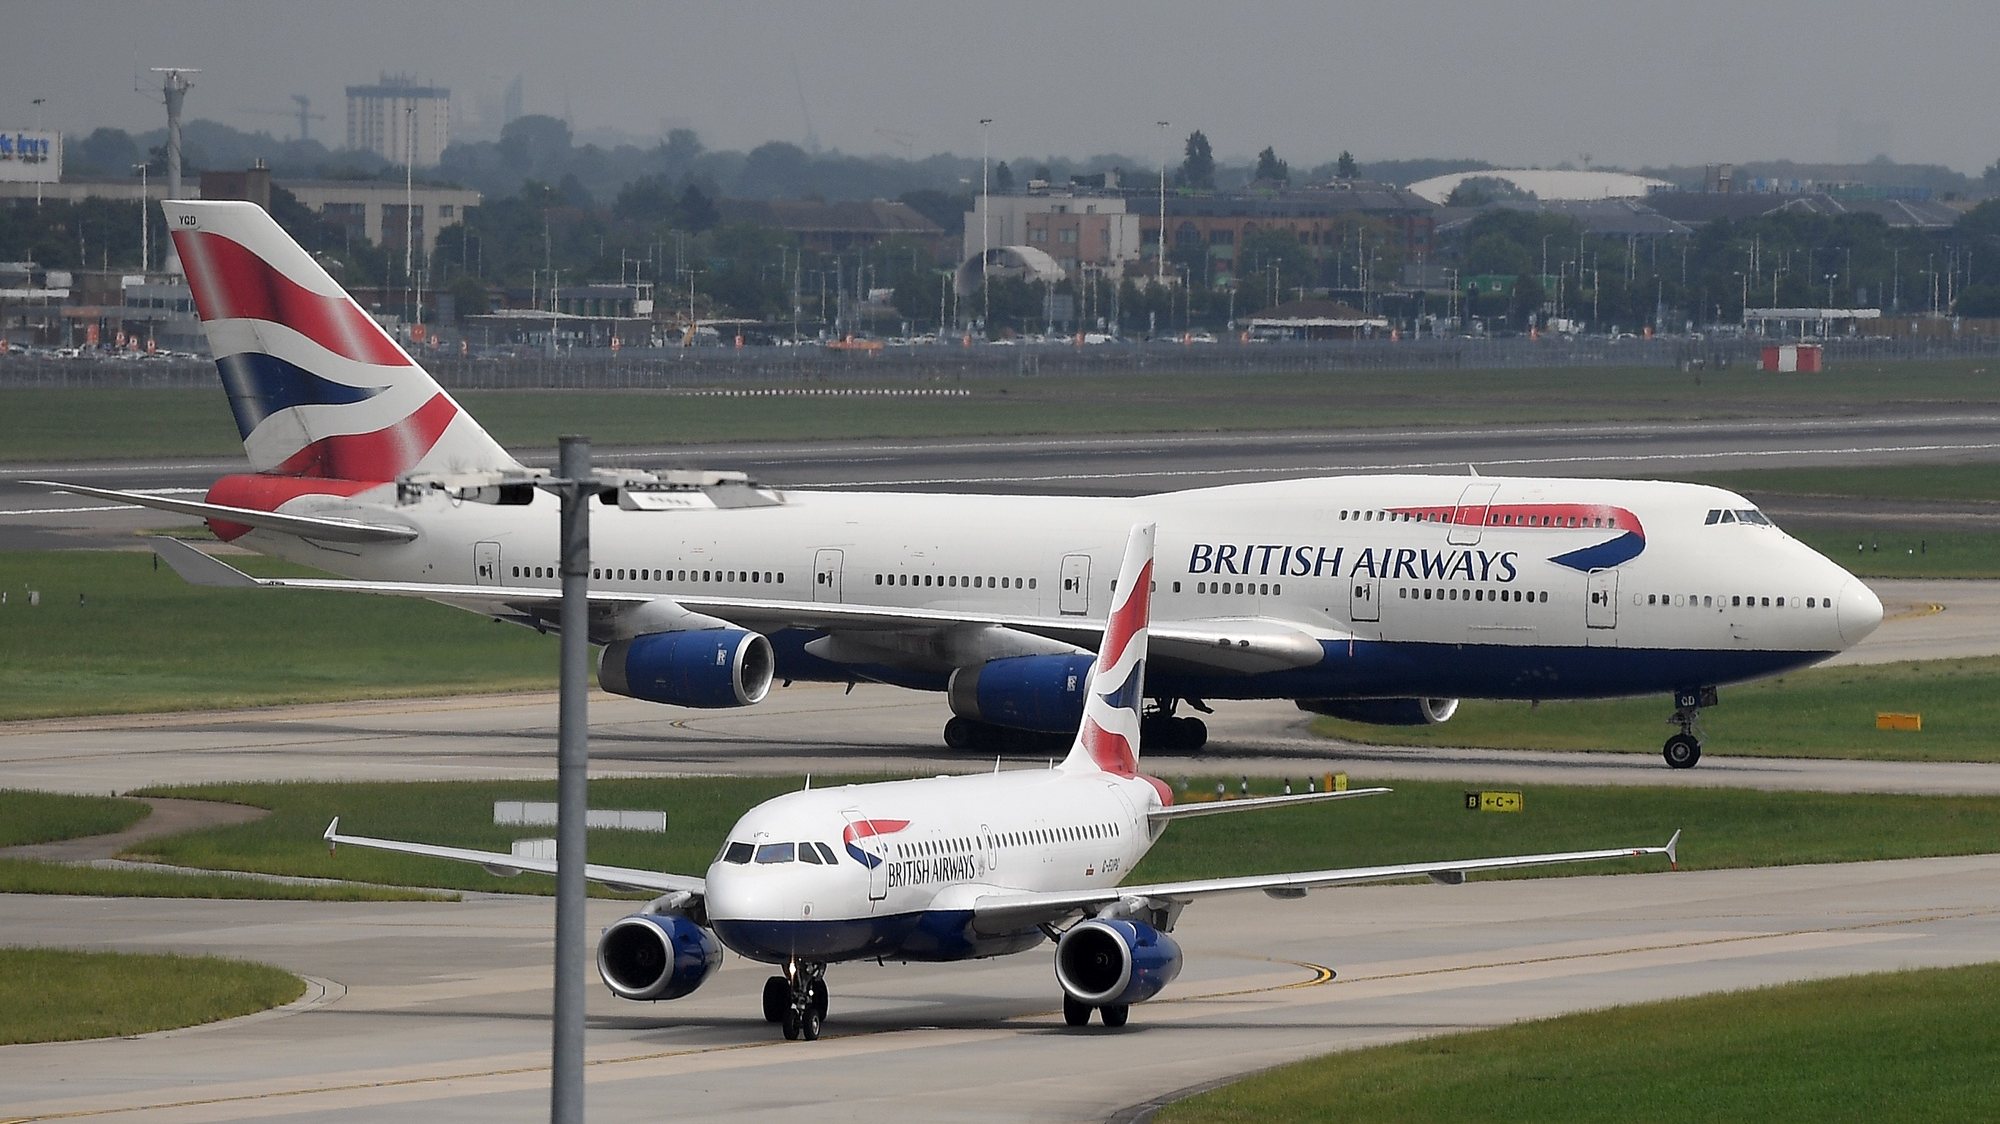 epa08551506 A British Airways Boeing 747 aircraft (behind)  taxis at Heathrow Airport in London, Britain, 29 May 2017 (reisued 17 July 2020). Britain&#039;s flagship aircraft carrier British Airways on 17 July 2020 confirmed the immediate retirement of its entire Boeing 747 fleet following the devastating impact of the coronavirus pandemic on air travel and its business.  EPA/ANDY RAIN *** Local Caption *** 54850332